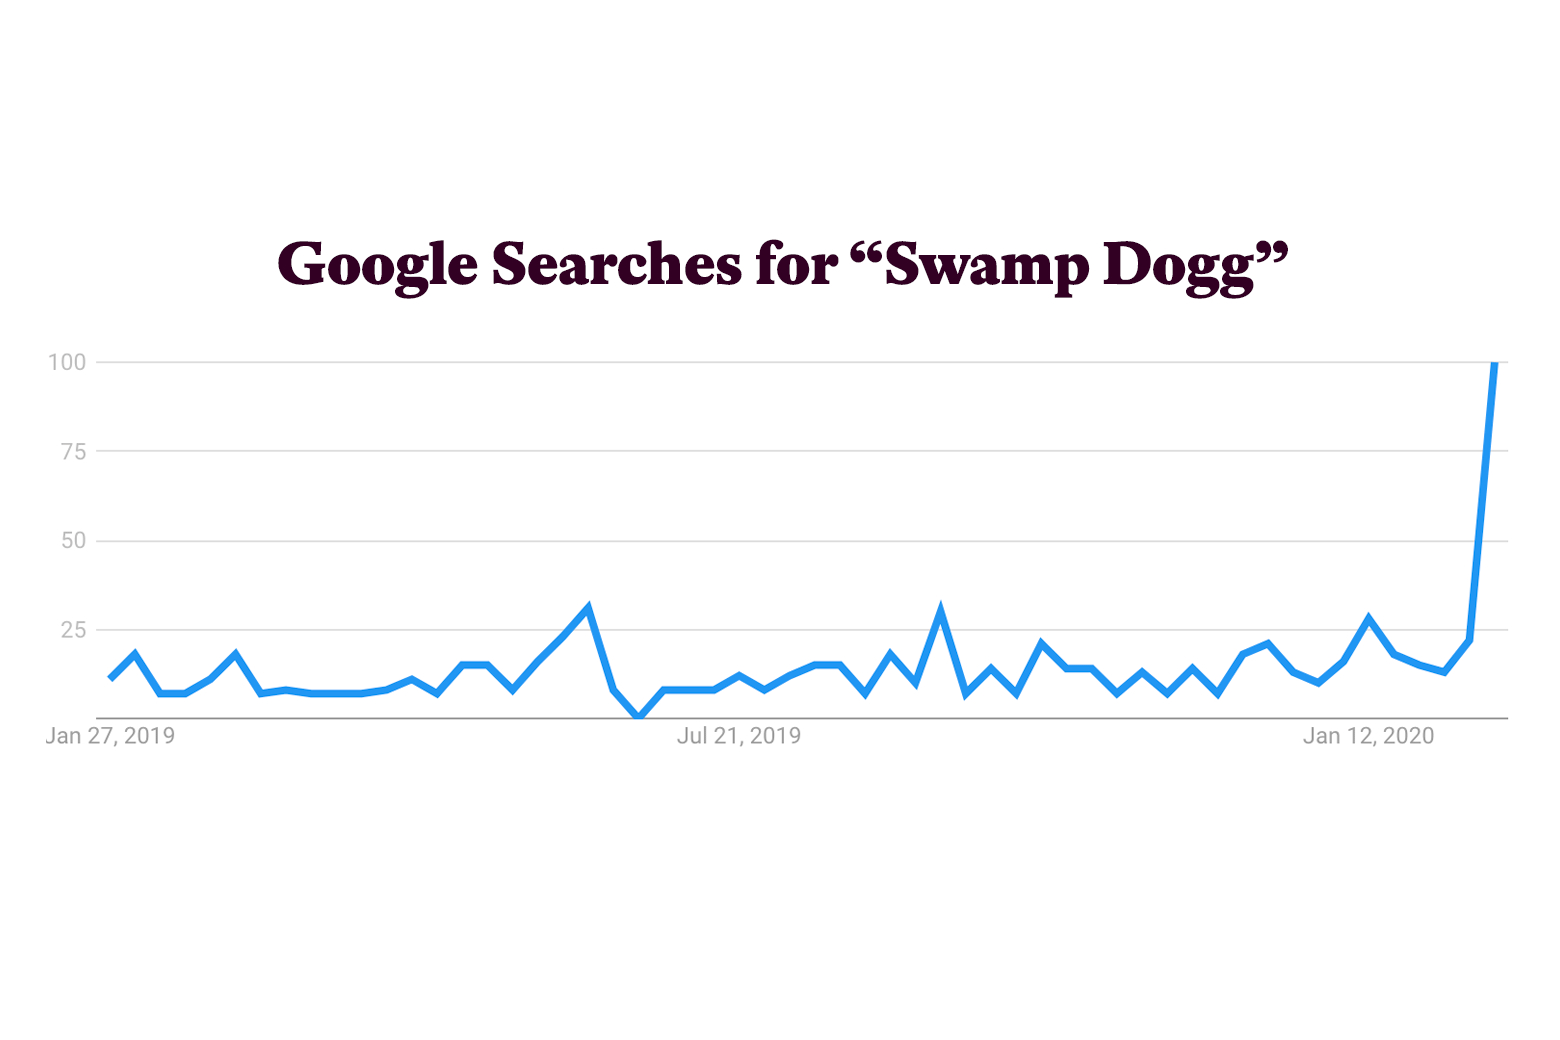 A chart illustrating the number of searches for "Swamp Dogg" over time.